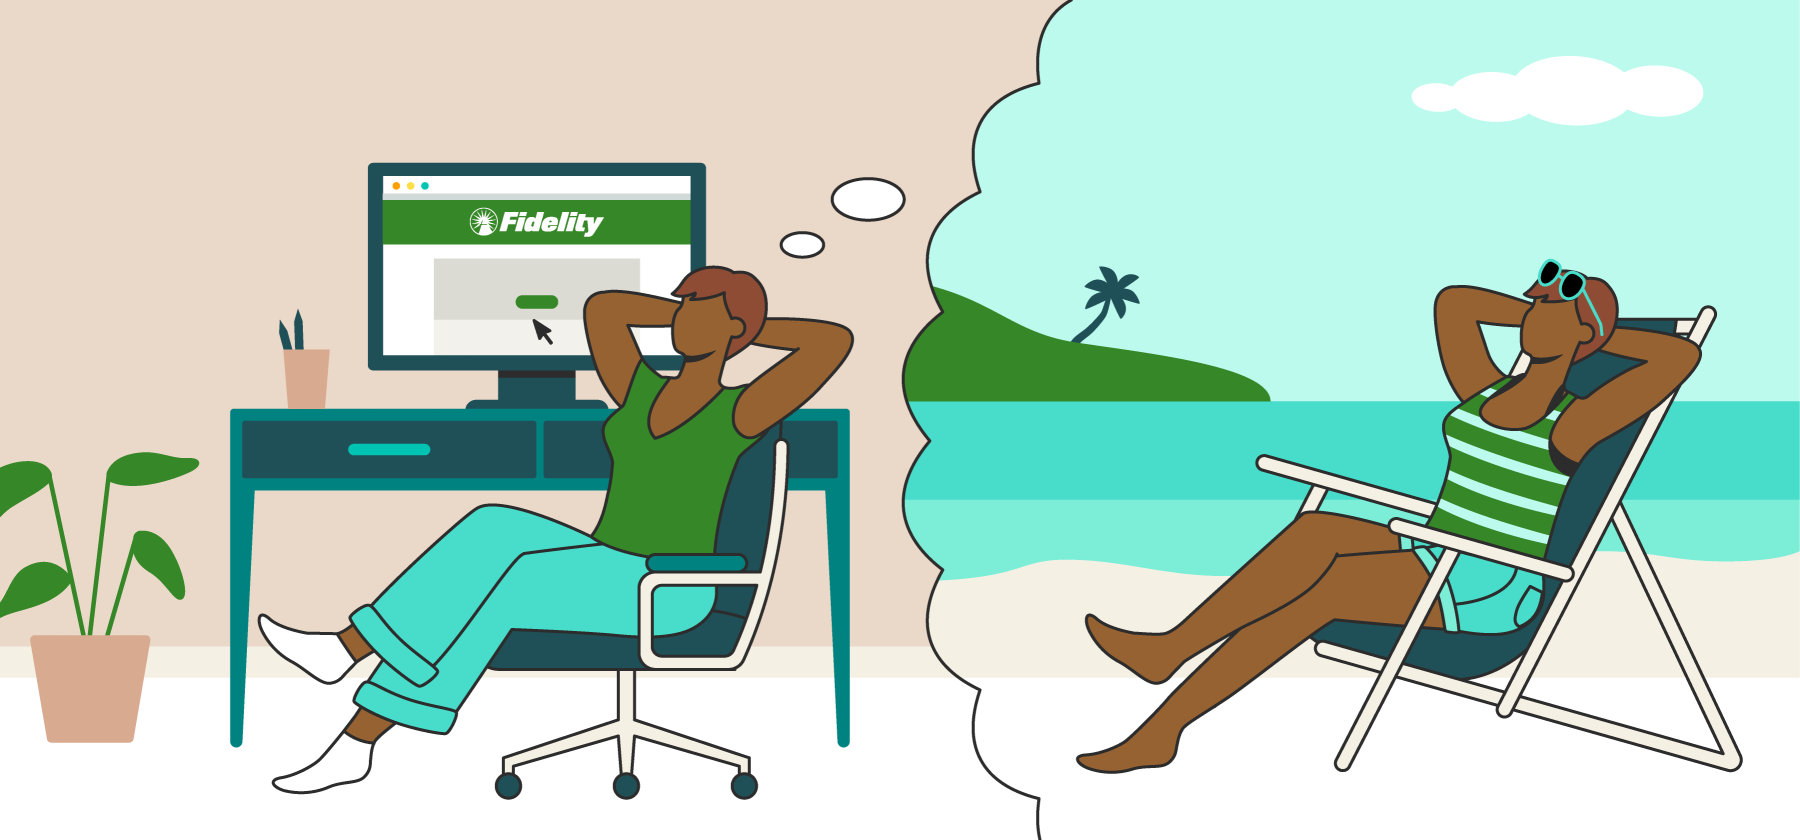 Woman on Fidelity website thinking about vacationing